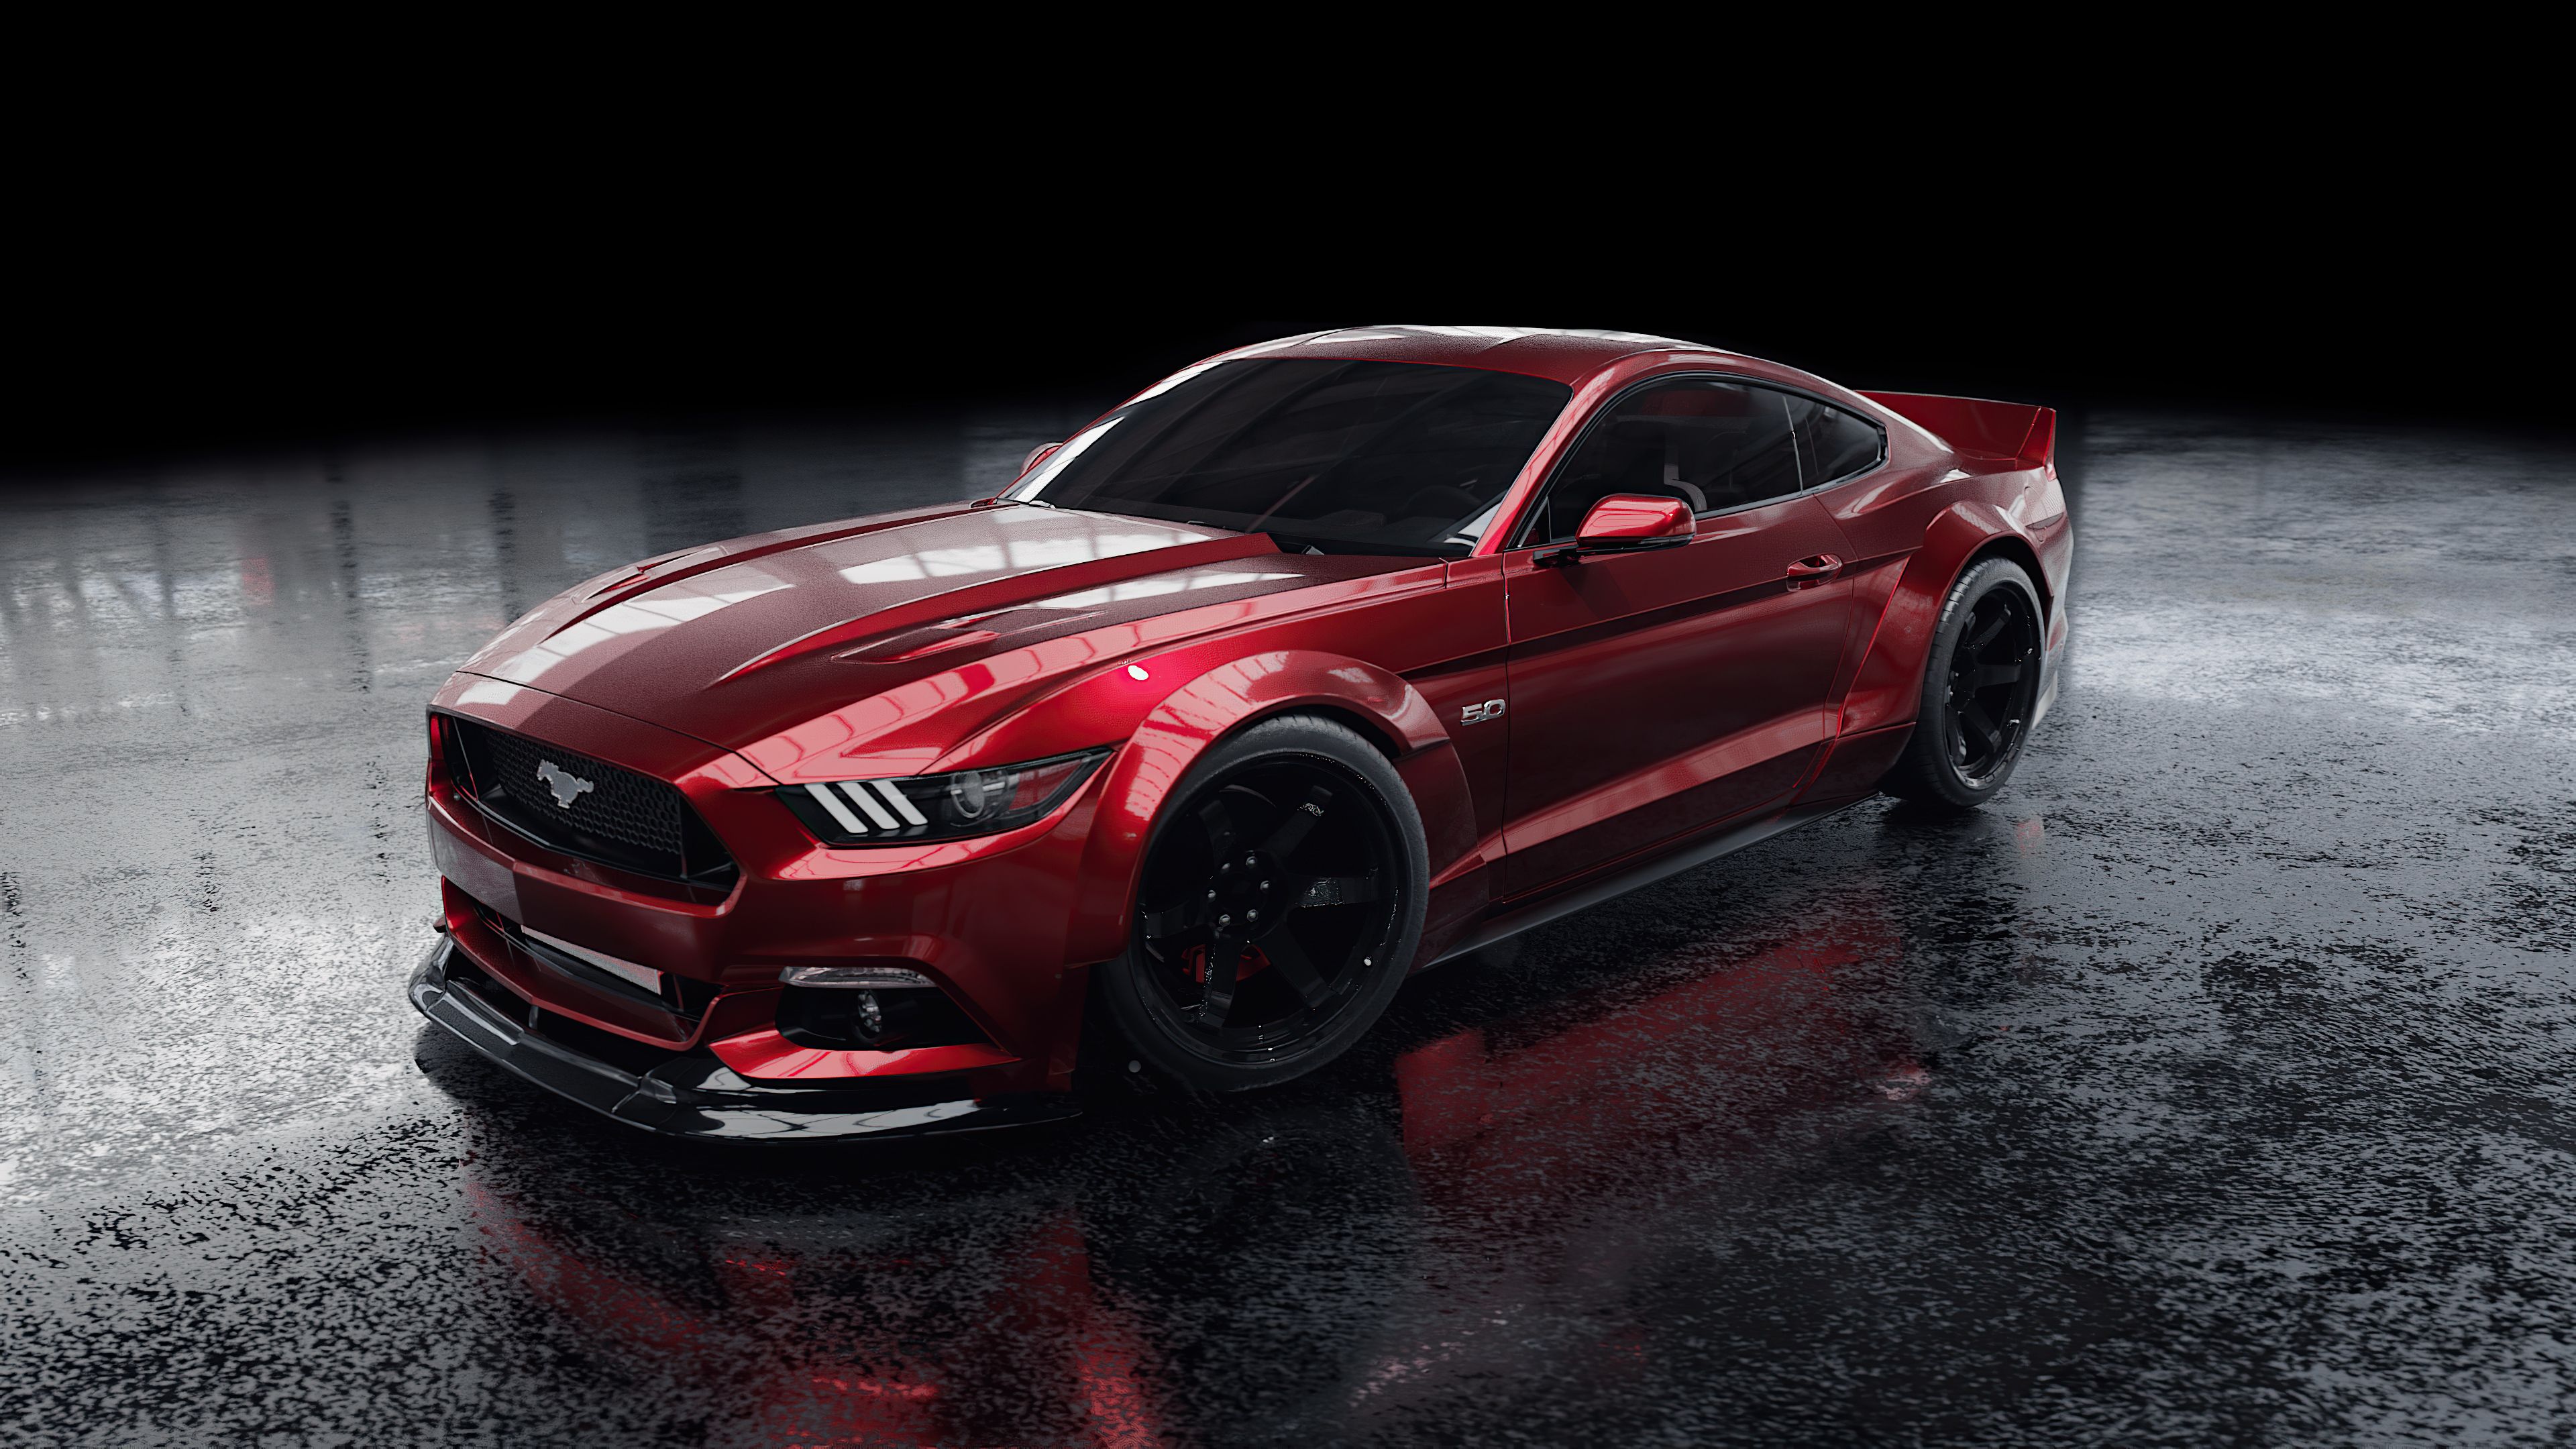 Red Ford Mustang 4k Red Ford Mustang 4k wallpaper. Ford mustang wallpaper, Ford mustang, Mustang